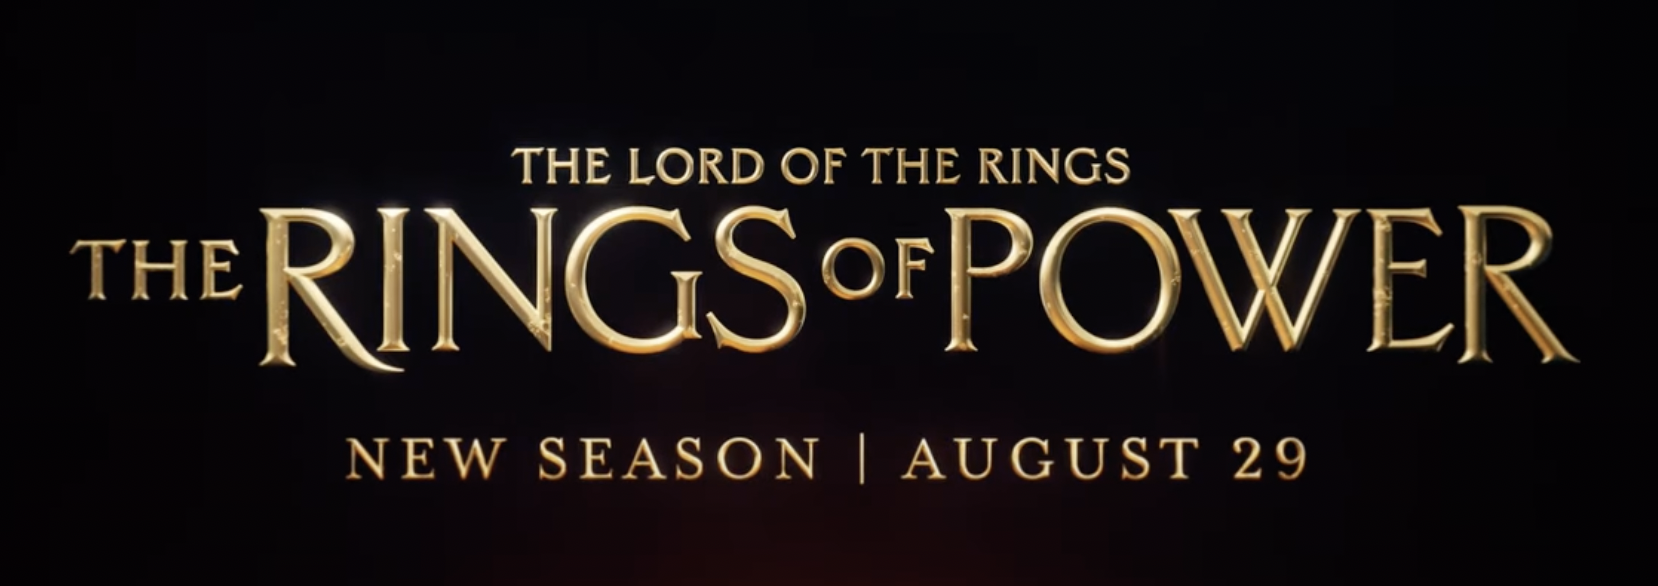 Prime Video Unveils Season Two Of 'The Lord of the Rings: The Rings of Power' At Upfront Presentation